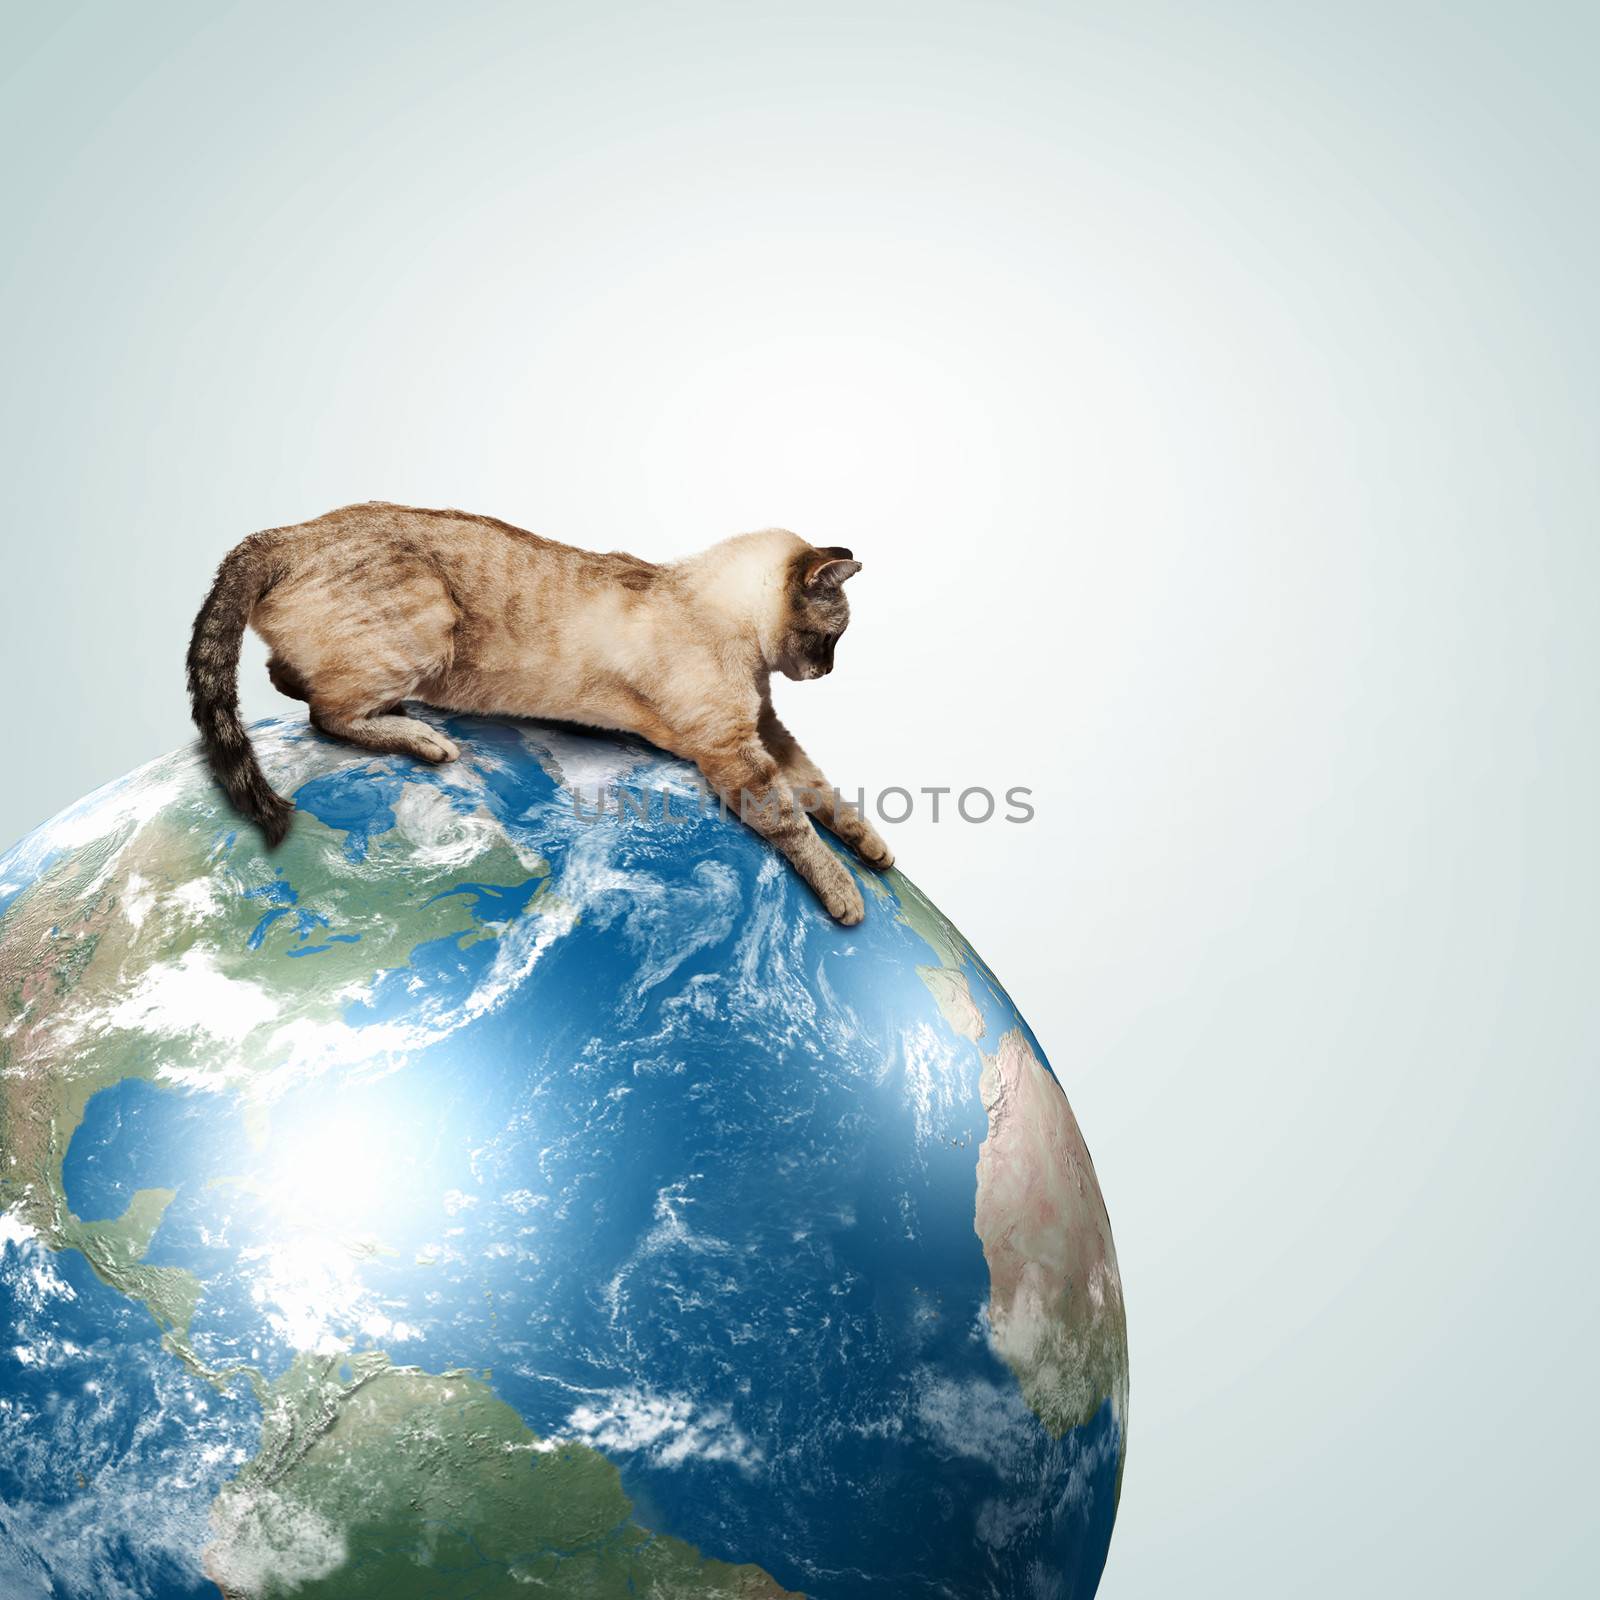 Image of siamese cat playing with globe.